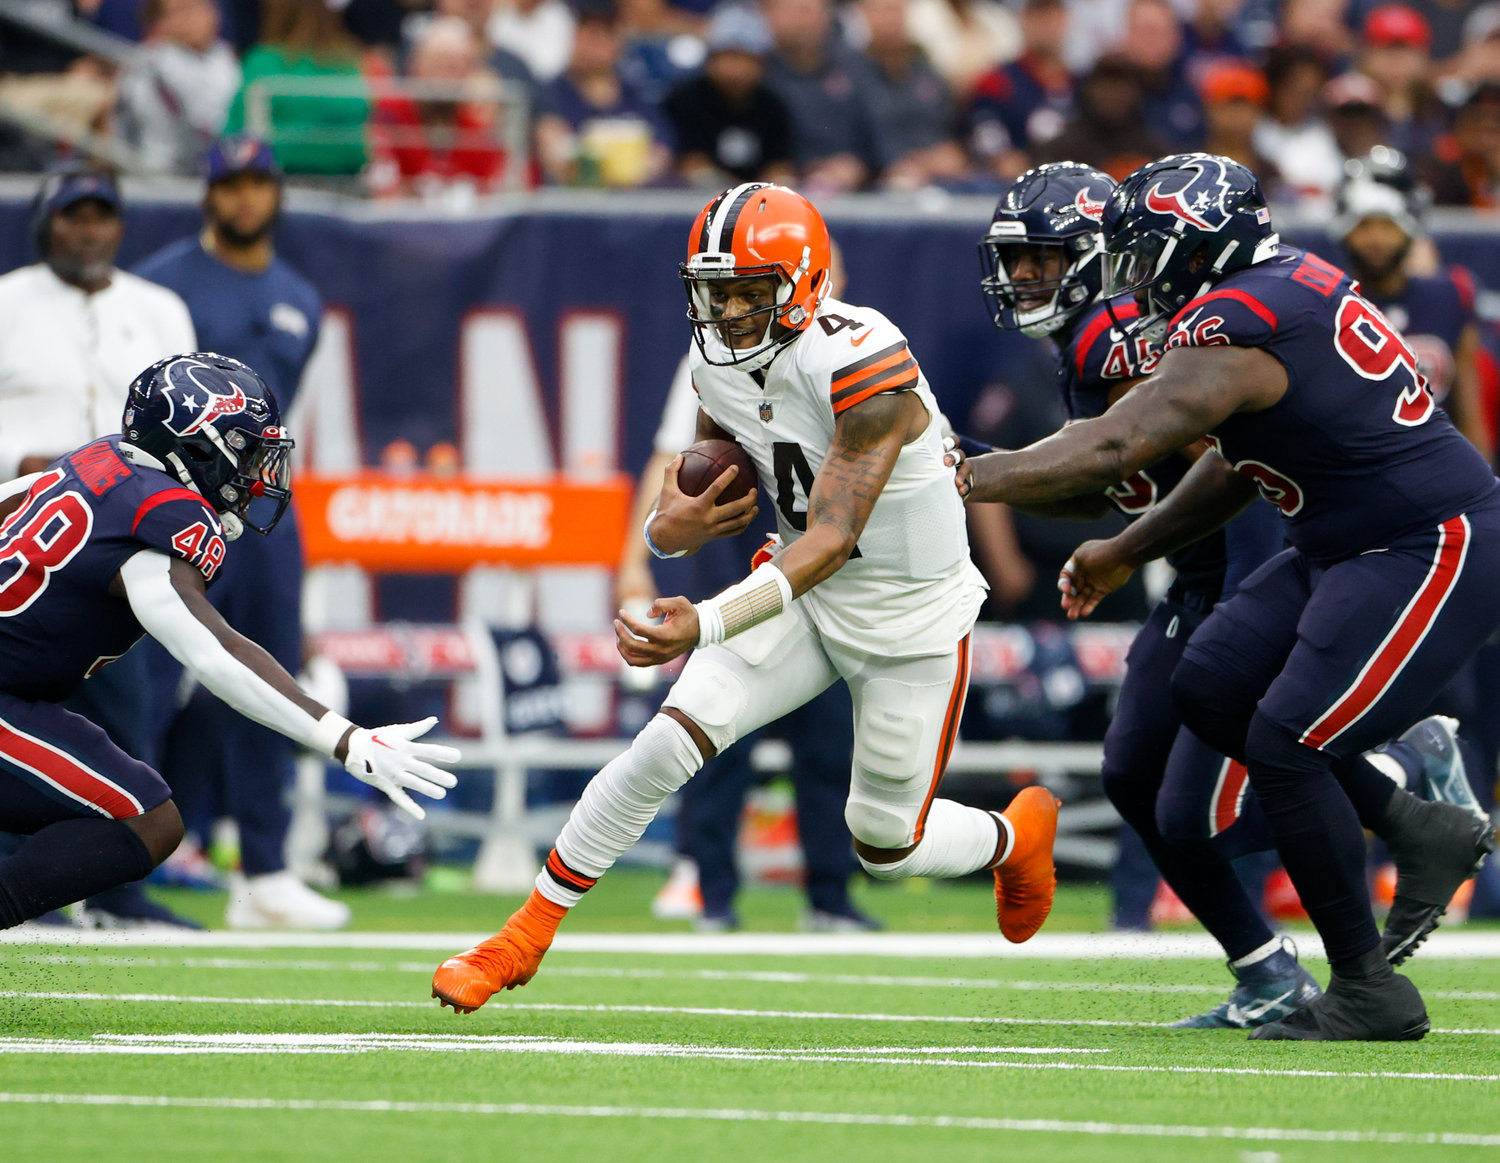 Cleveland Browns quarterback Deshaun Watson (4) carries the ball during an NFL game between the Houston Texans and the Cleveland Browns on Dec. 4, 2022, in Houston. The Browns won, 27-14.